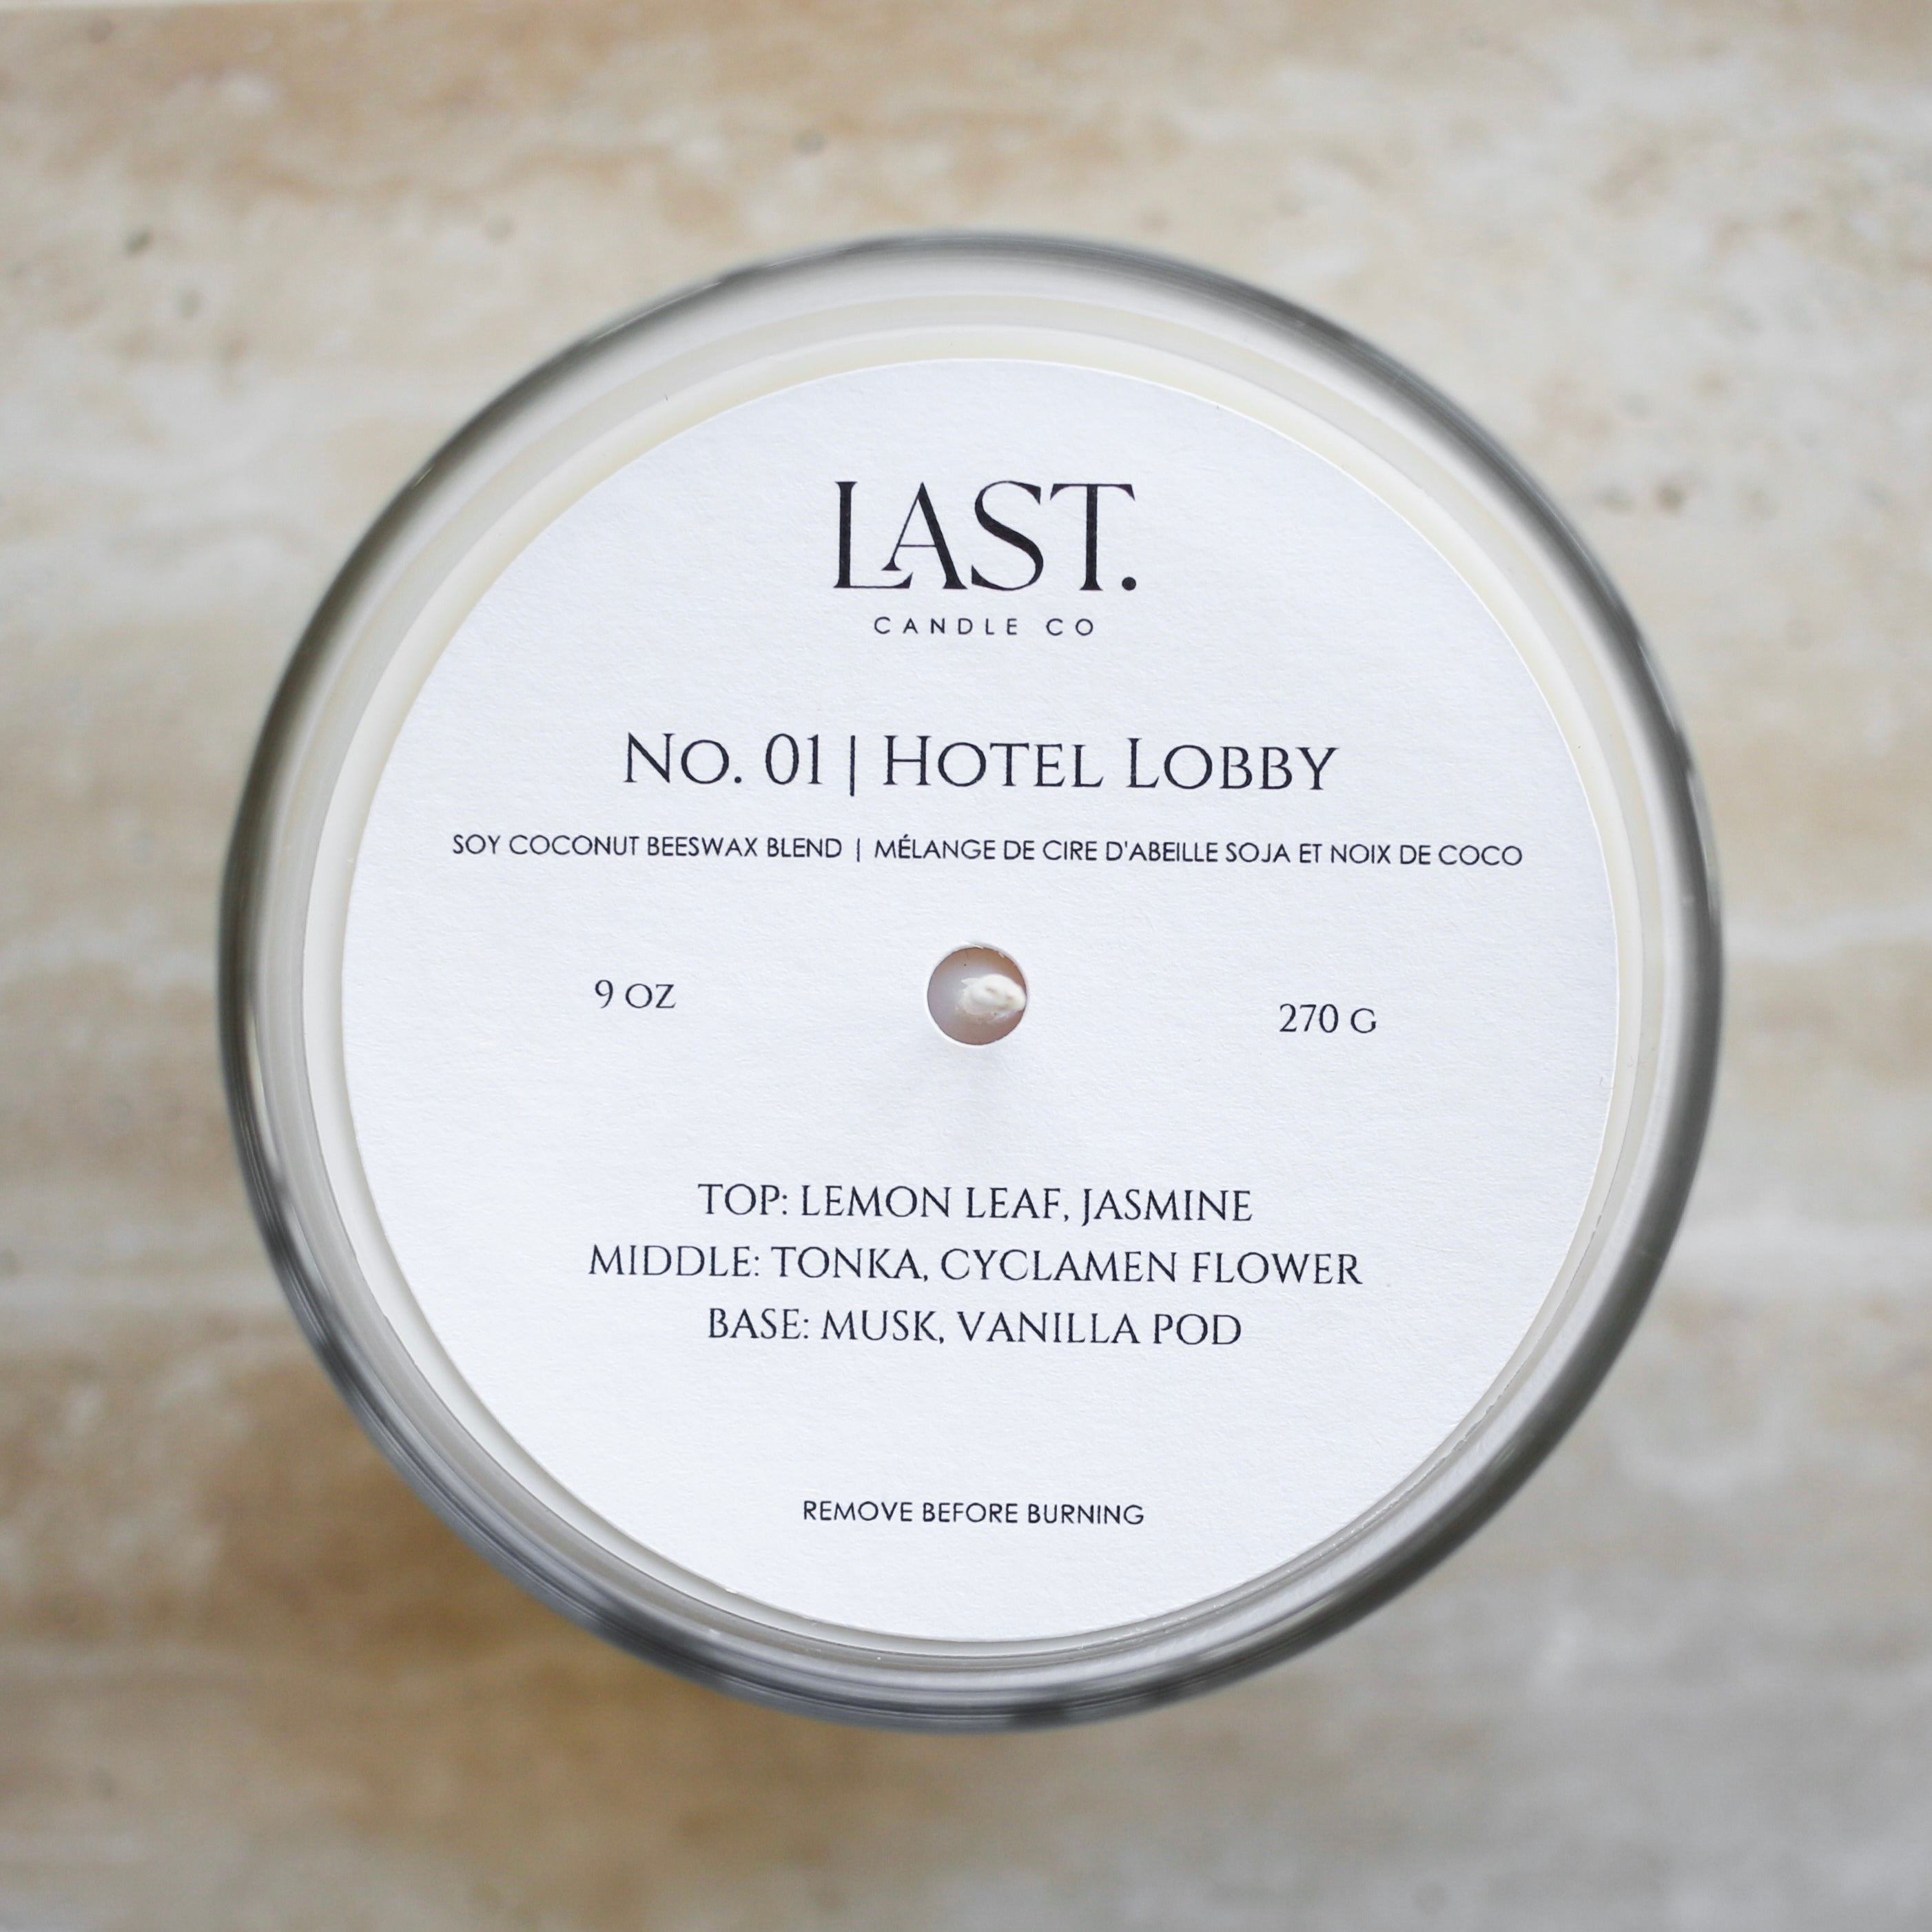 Do candles lose their scent?– Hotel Lobby Candle